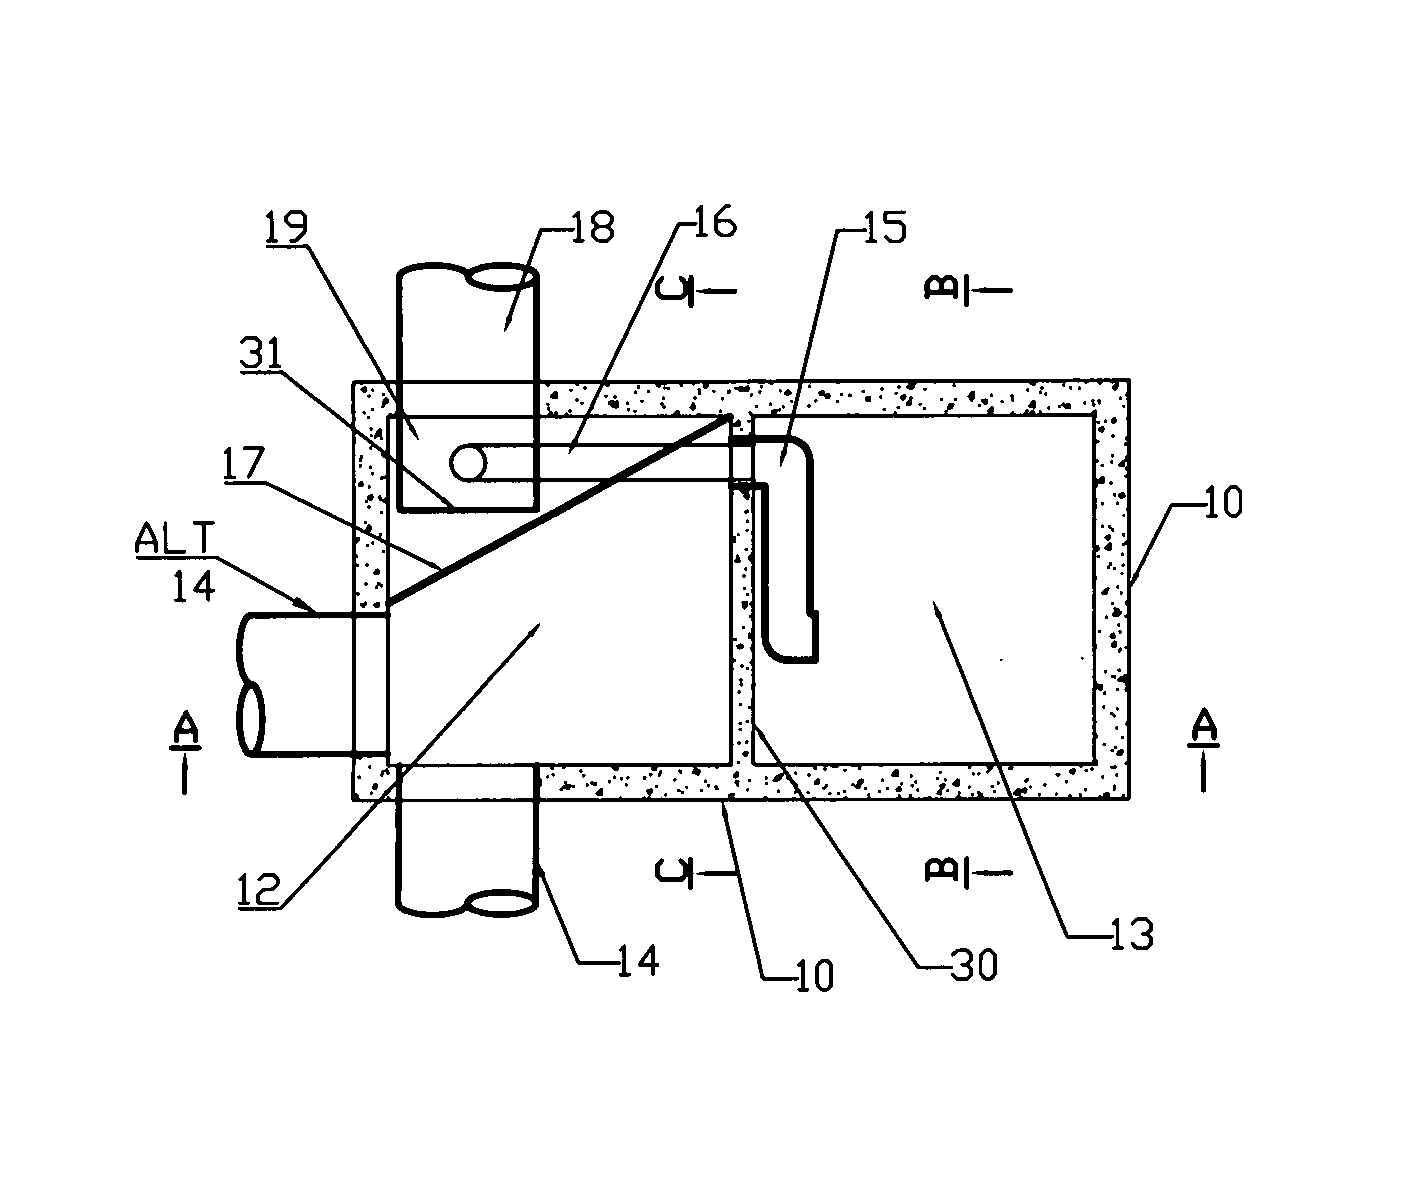 Apparatus for separating a light fluid from a heavy one and/or removing sediment from a fluid stream